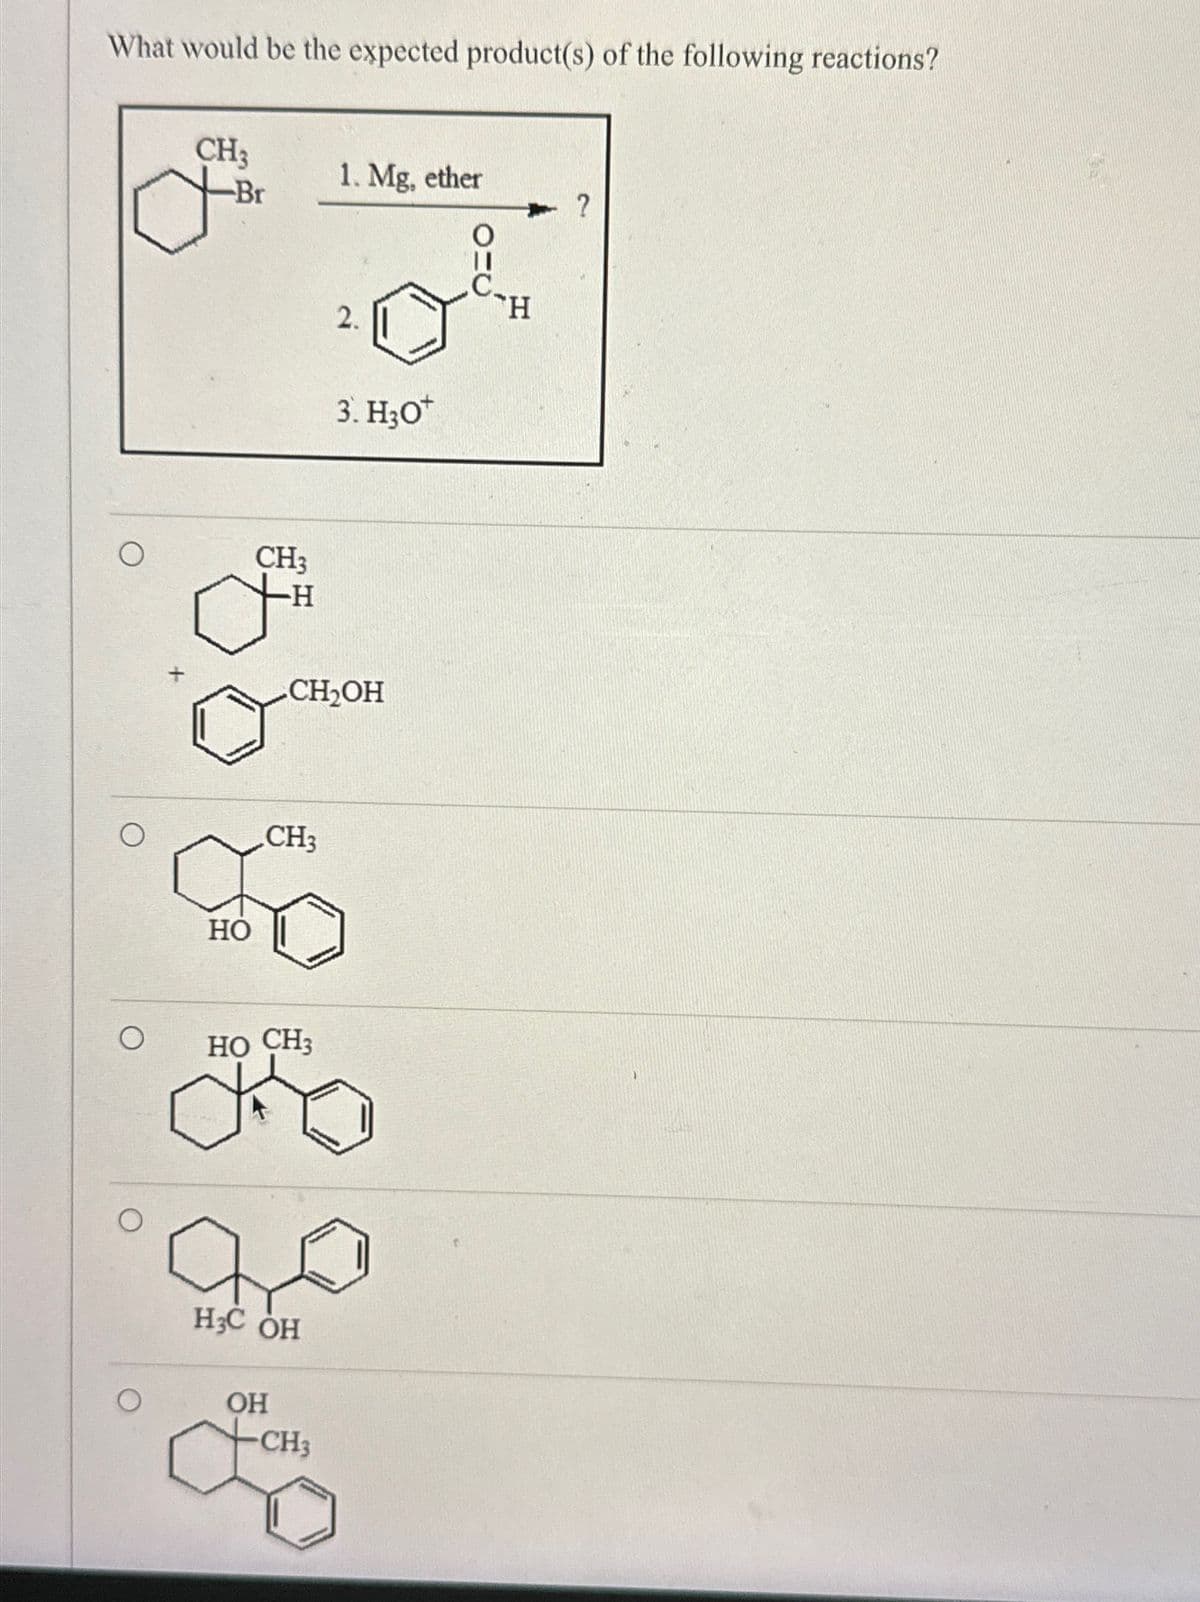 What would be the expected product(s) of the following reactions?
CH3
-Br
1. Mg, ether
CH3
H
о
HO
?
0
H
2.
3. H3O+
CH₂OH
CH3
HO CH3
а
H3C OH
OH
CH3